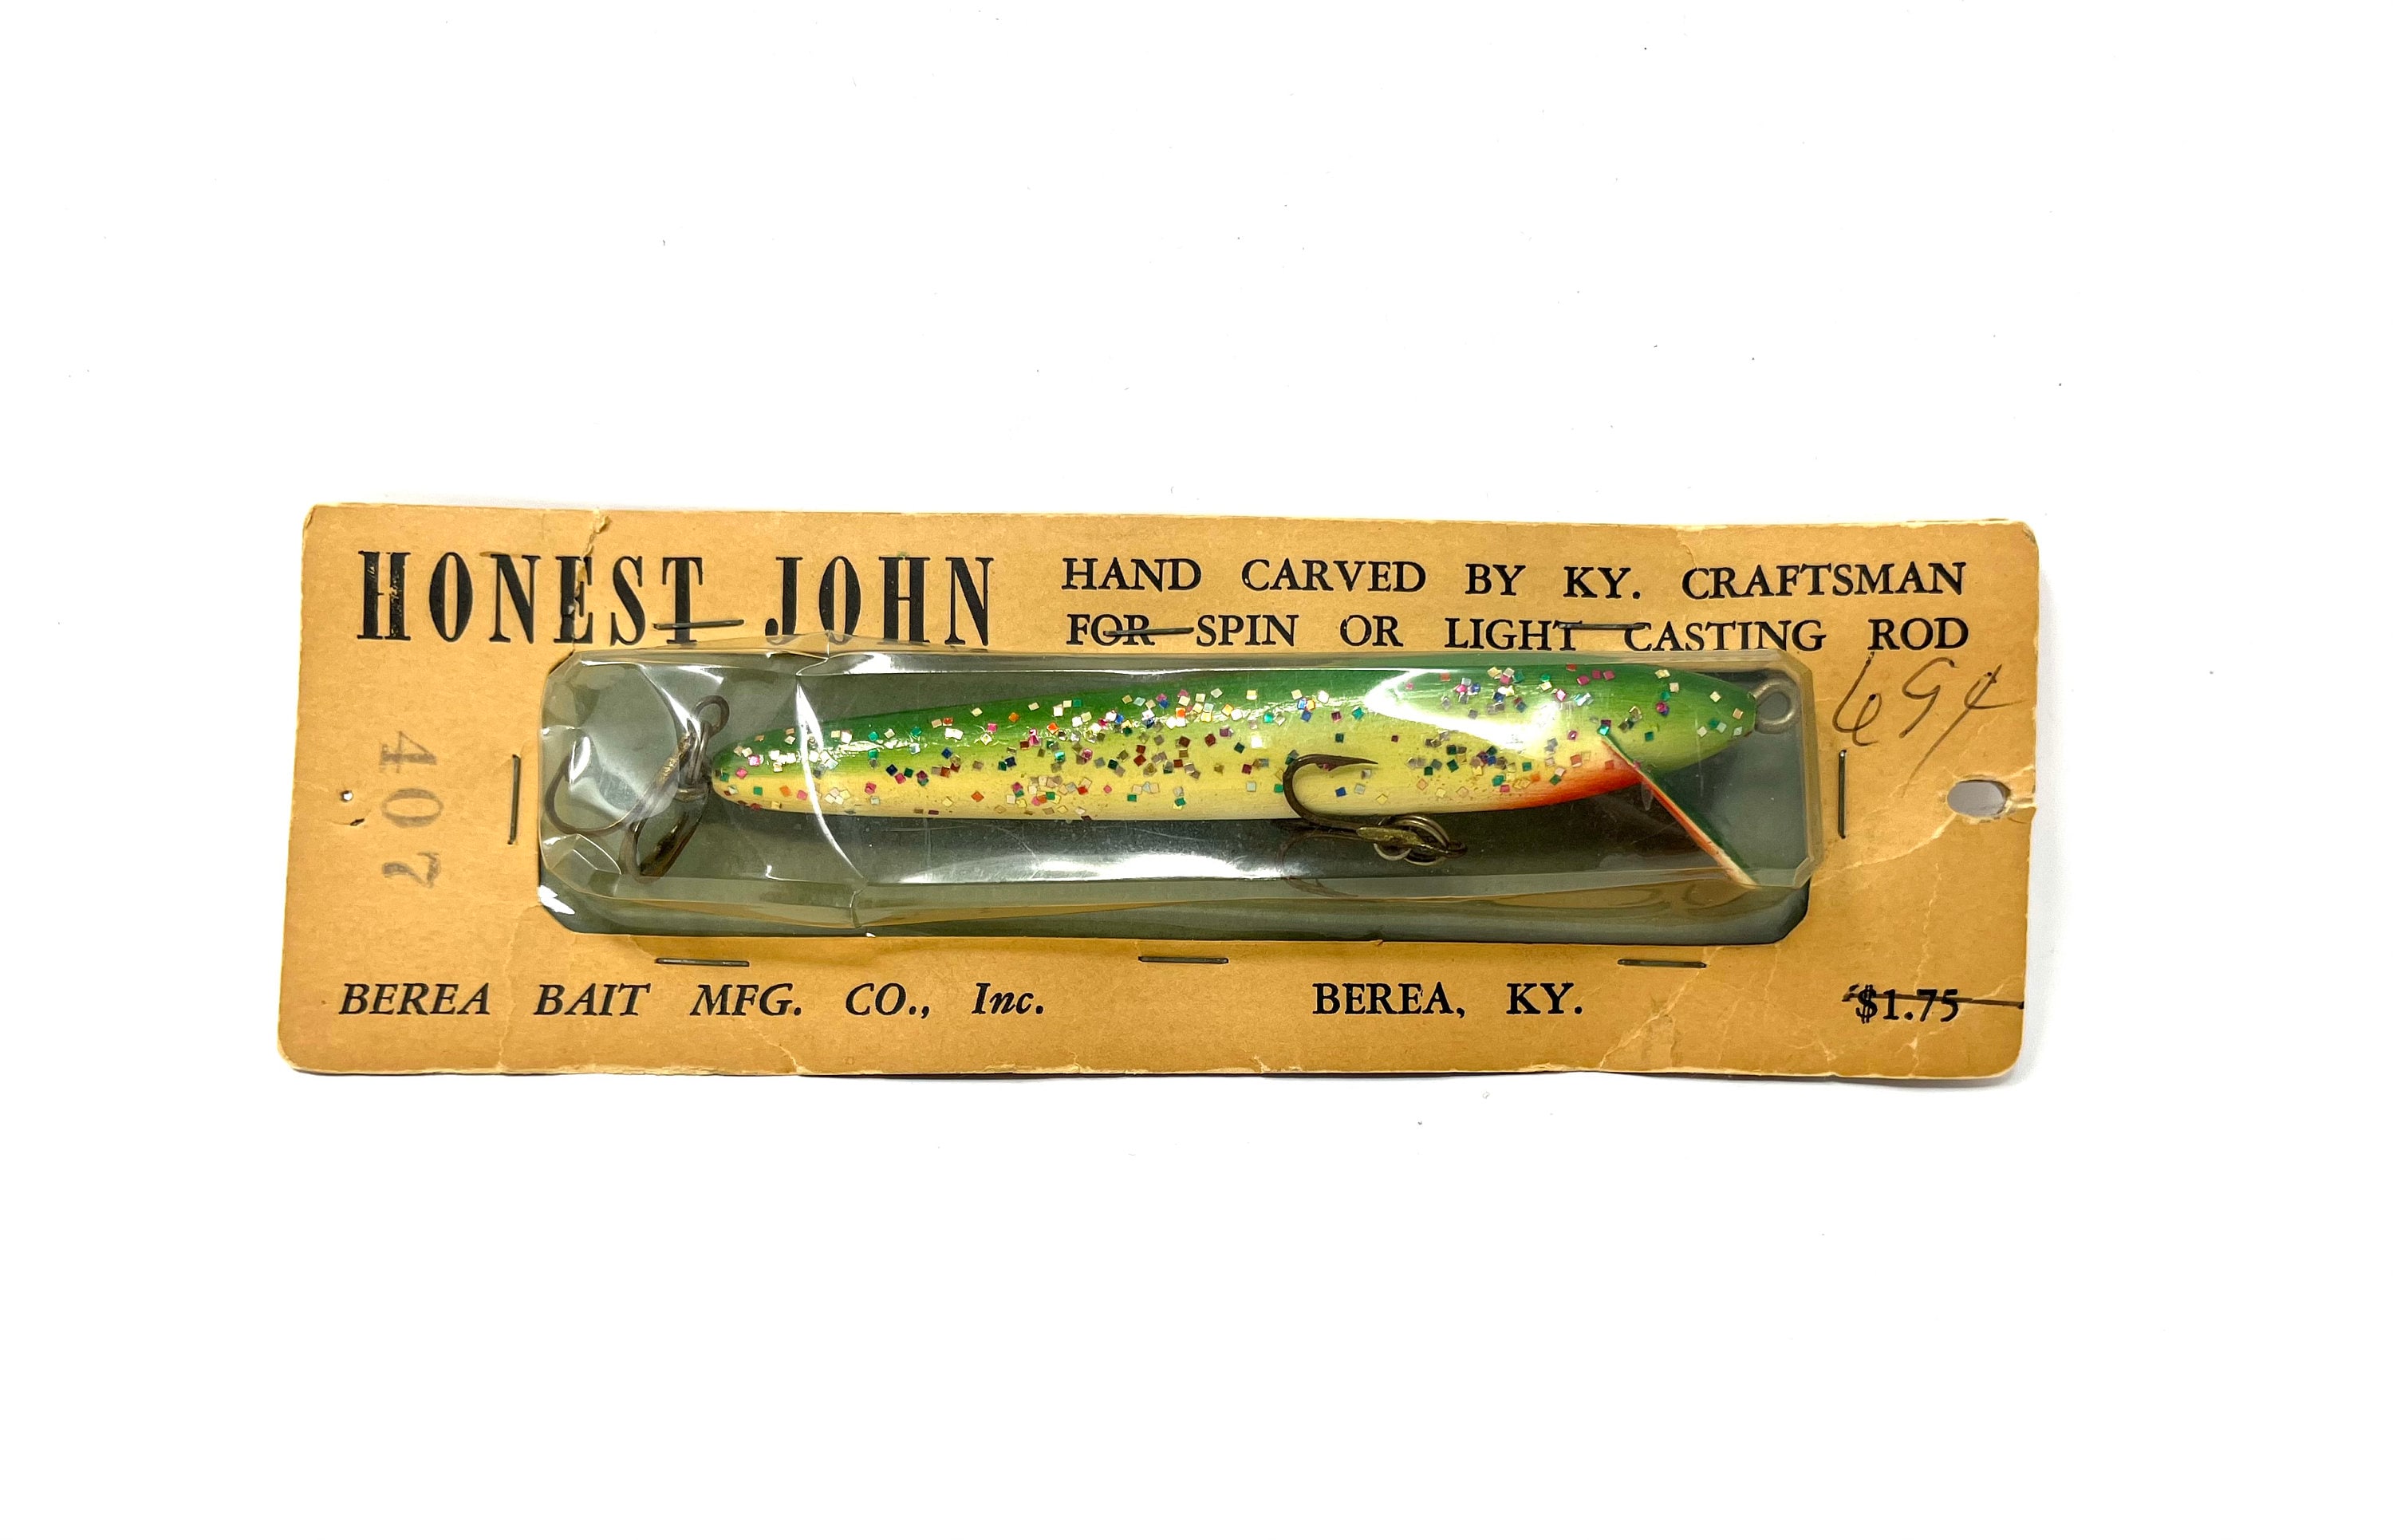 Berea Bait Co Honest John Scarce Misc Bait Hand Carved Wood on Card and  Vintage South Bend Fish Obite in Tough Black and White Fishing Lure -   Finland